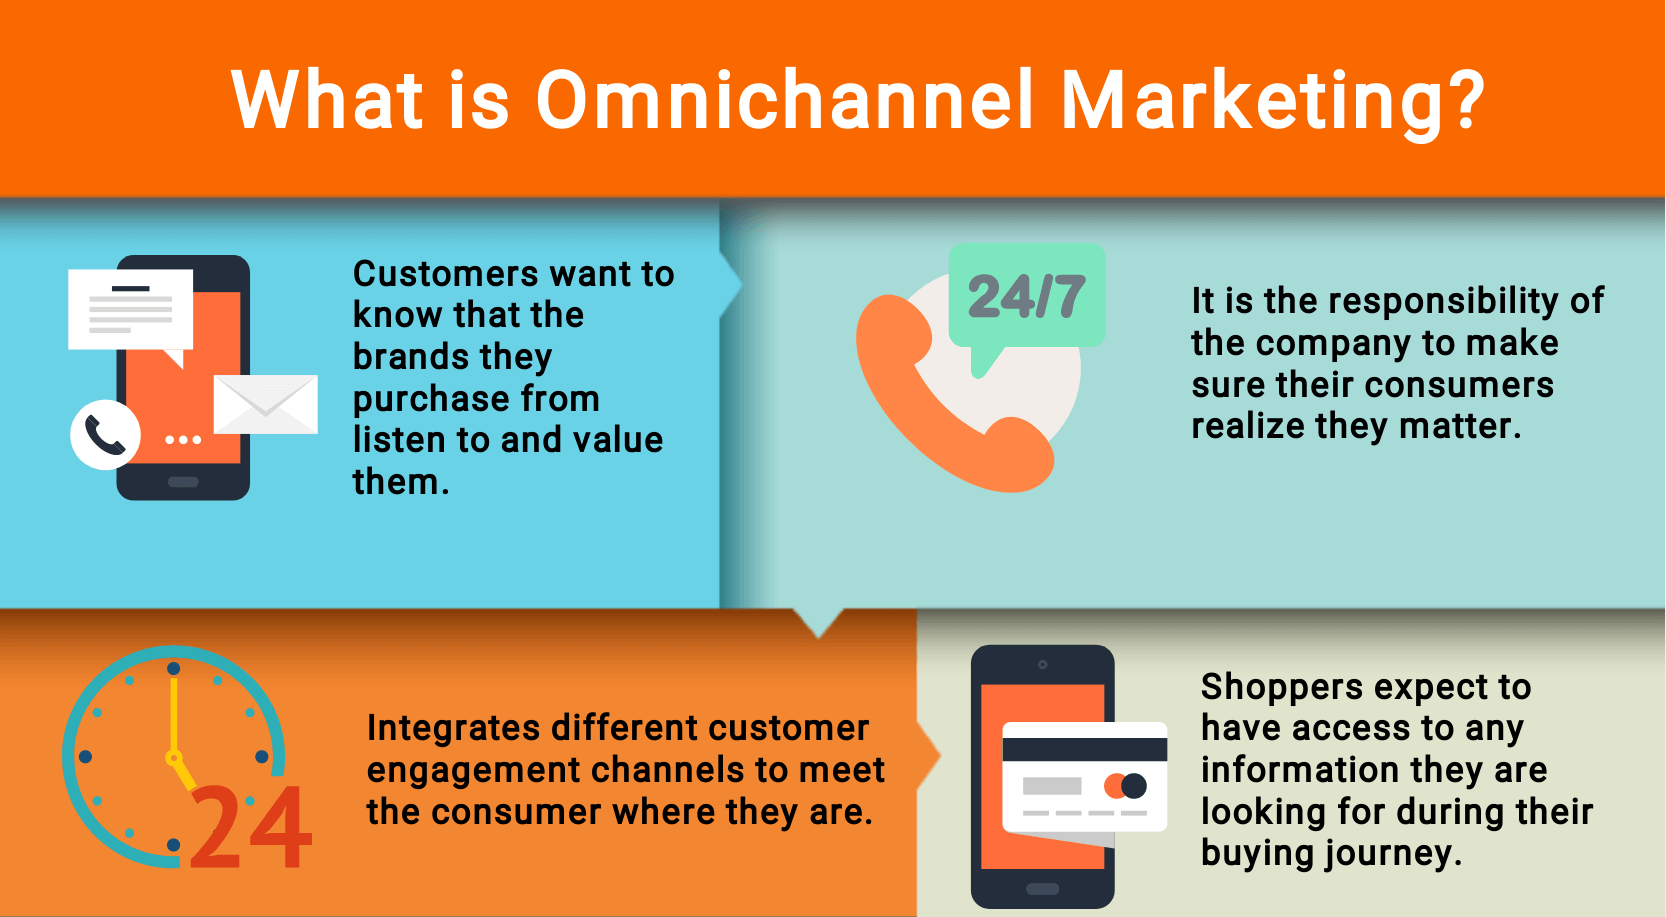 what is omnichannel?